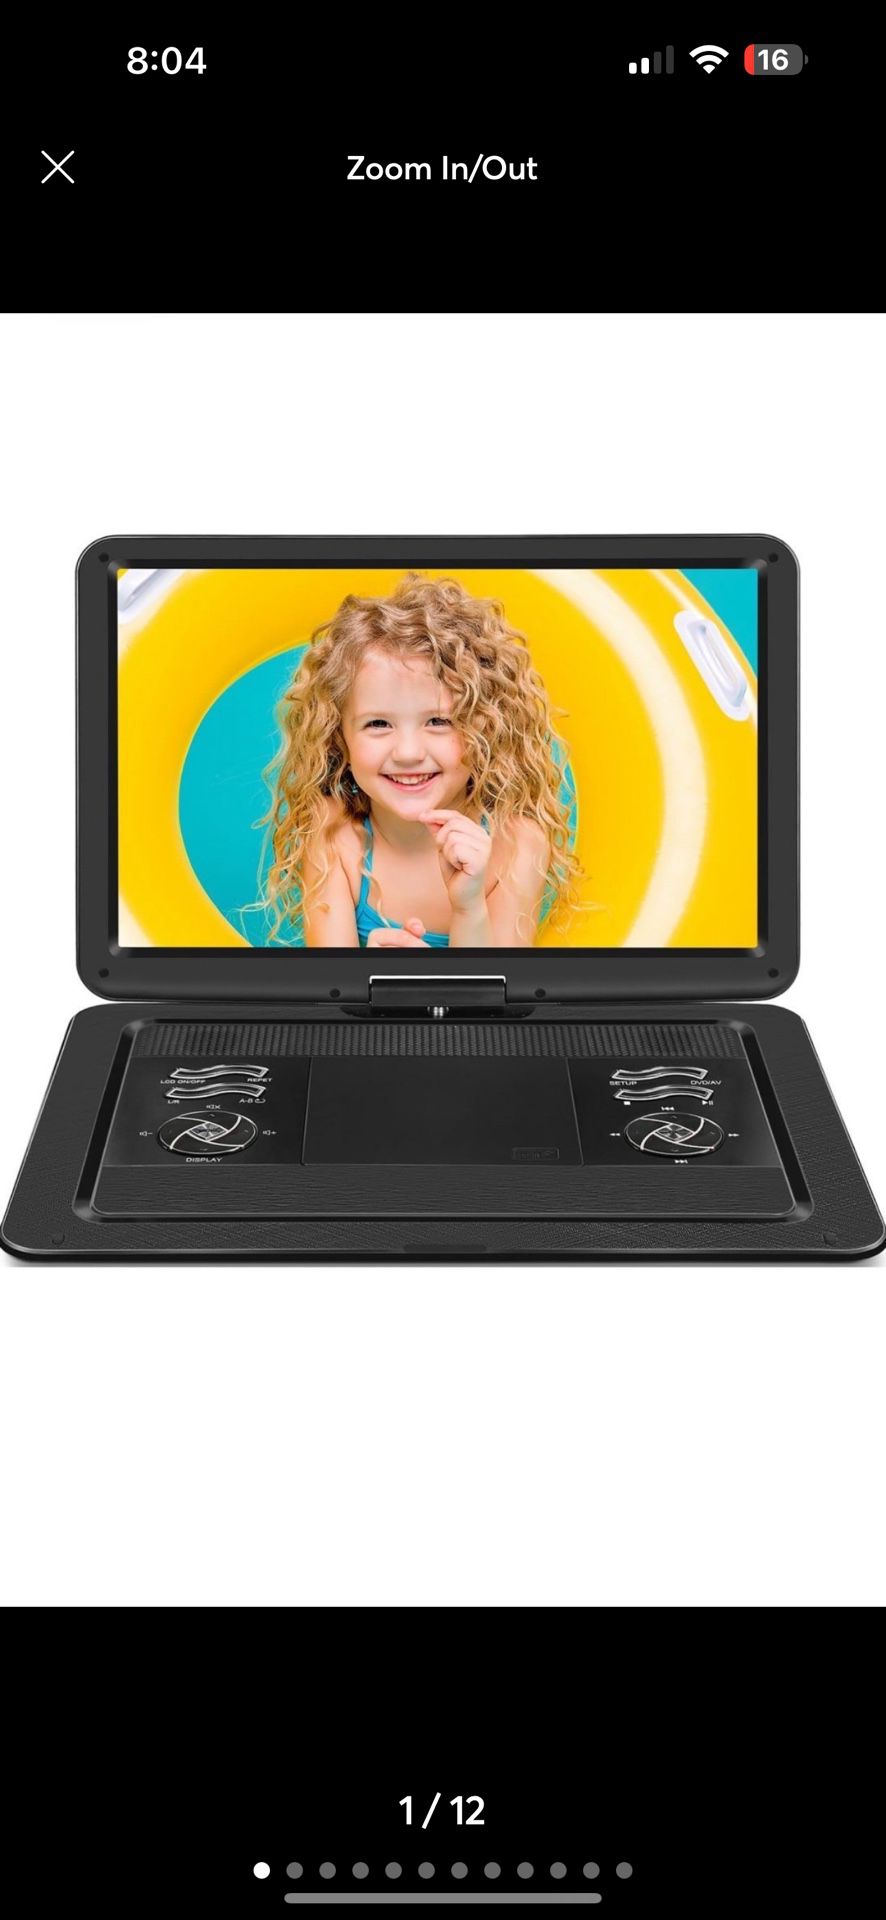 19.6" Portable DVD Player with 17.1" Large HD Screen, 5 Hours Battery